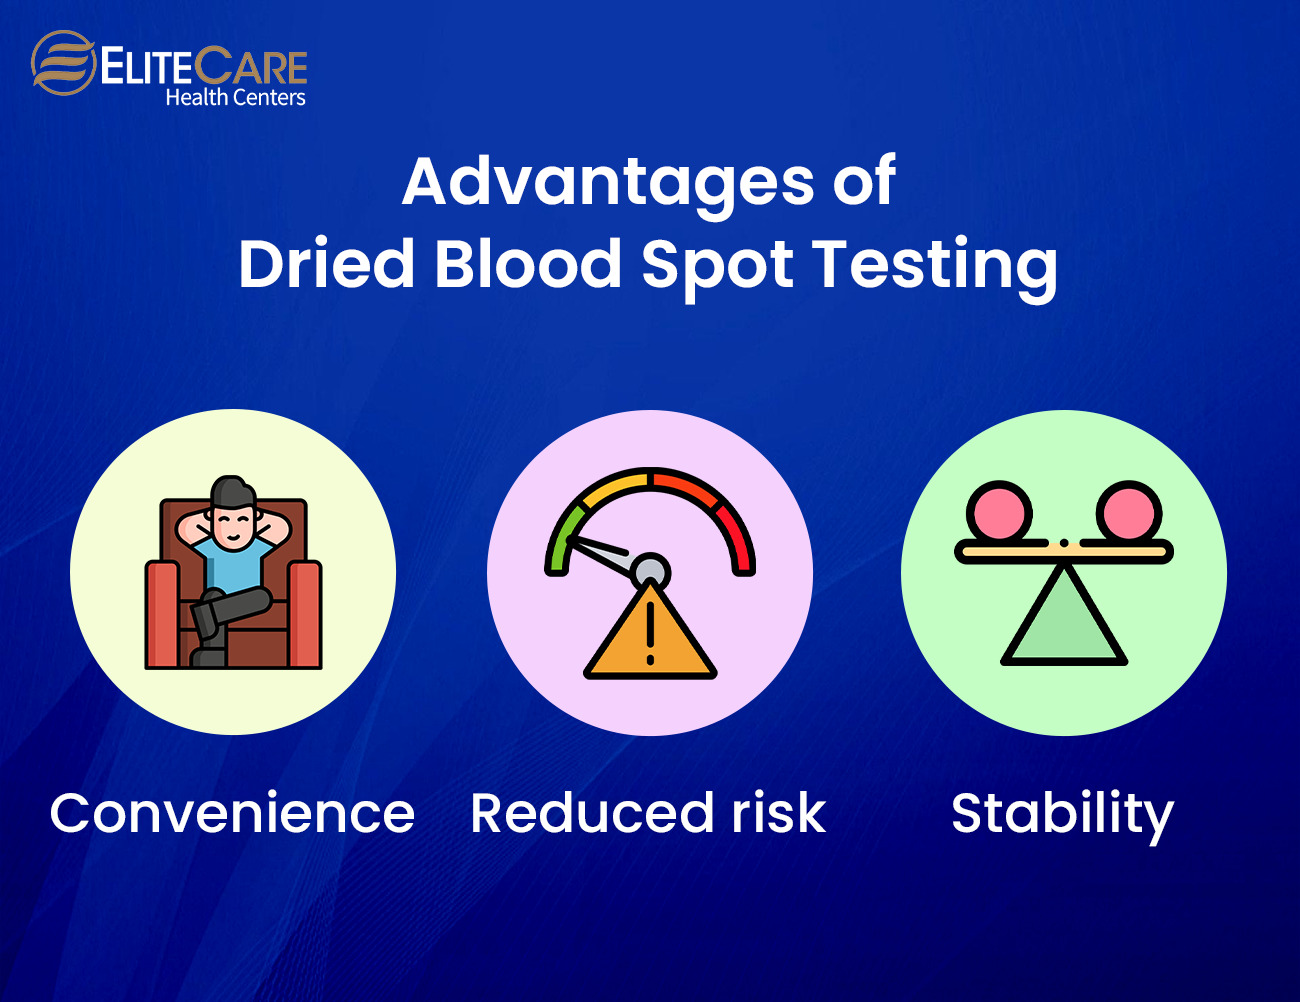 Advantages of Dried Blood Spot Testing